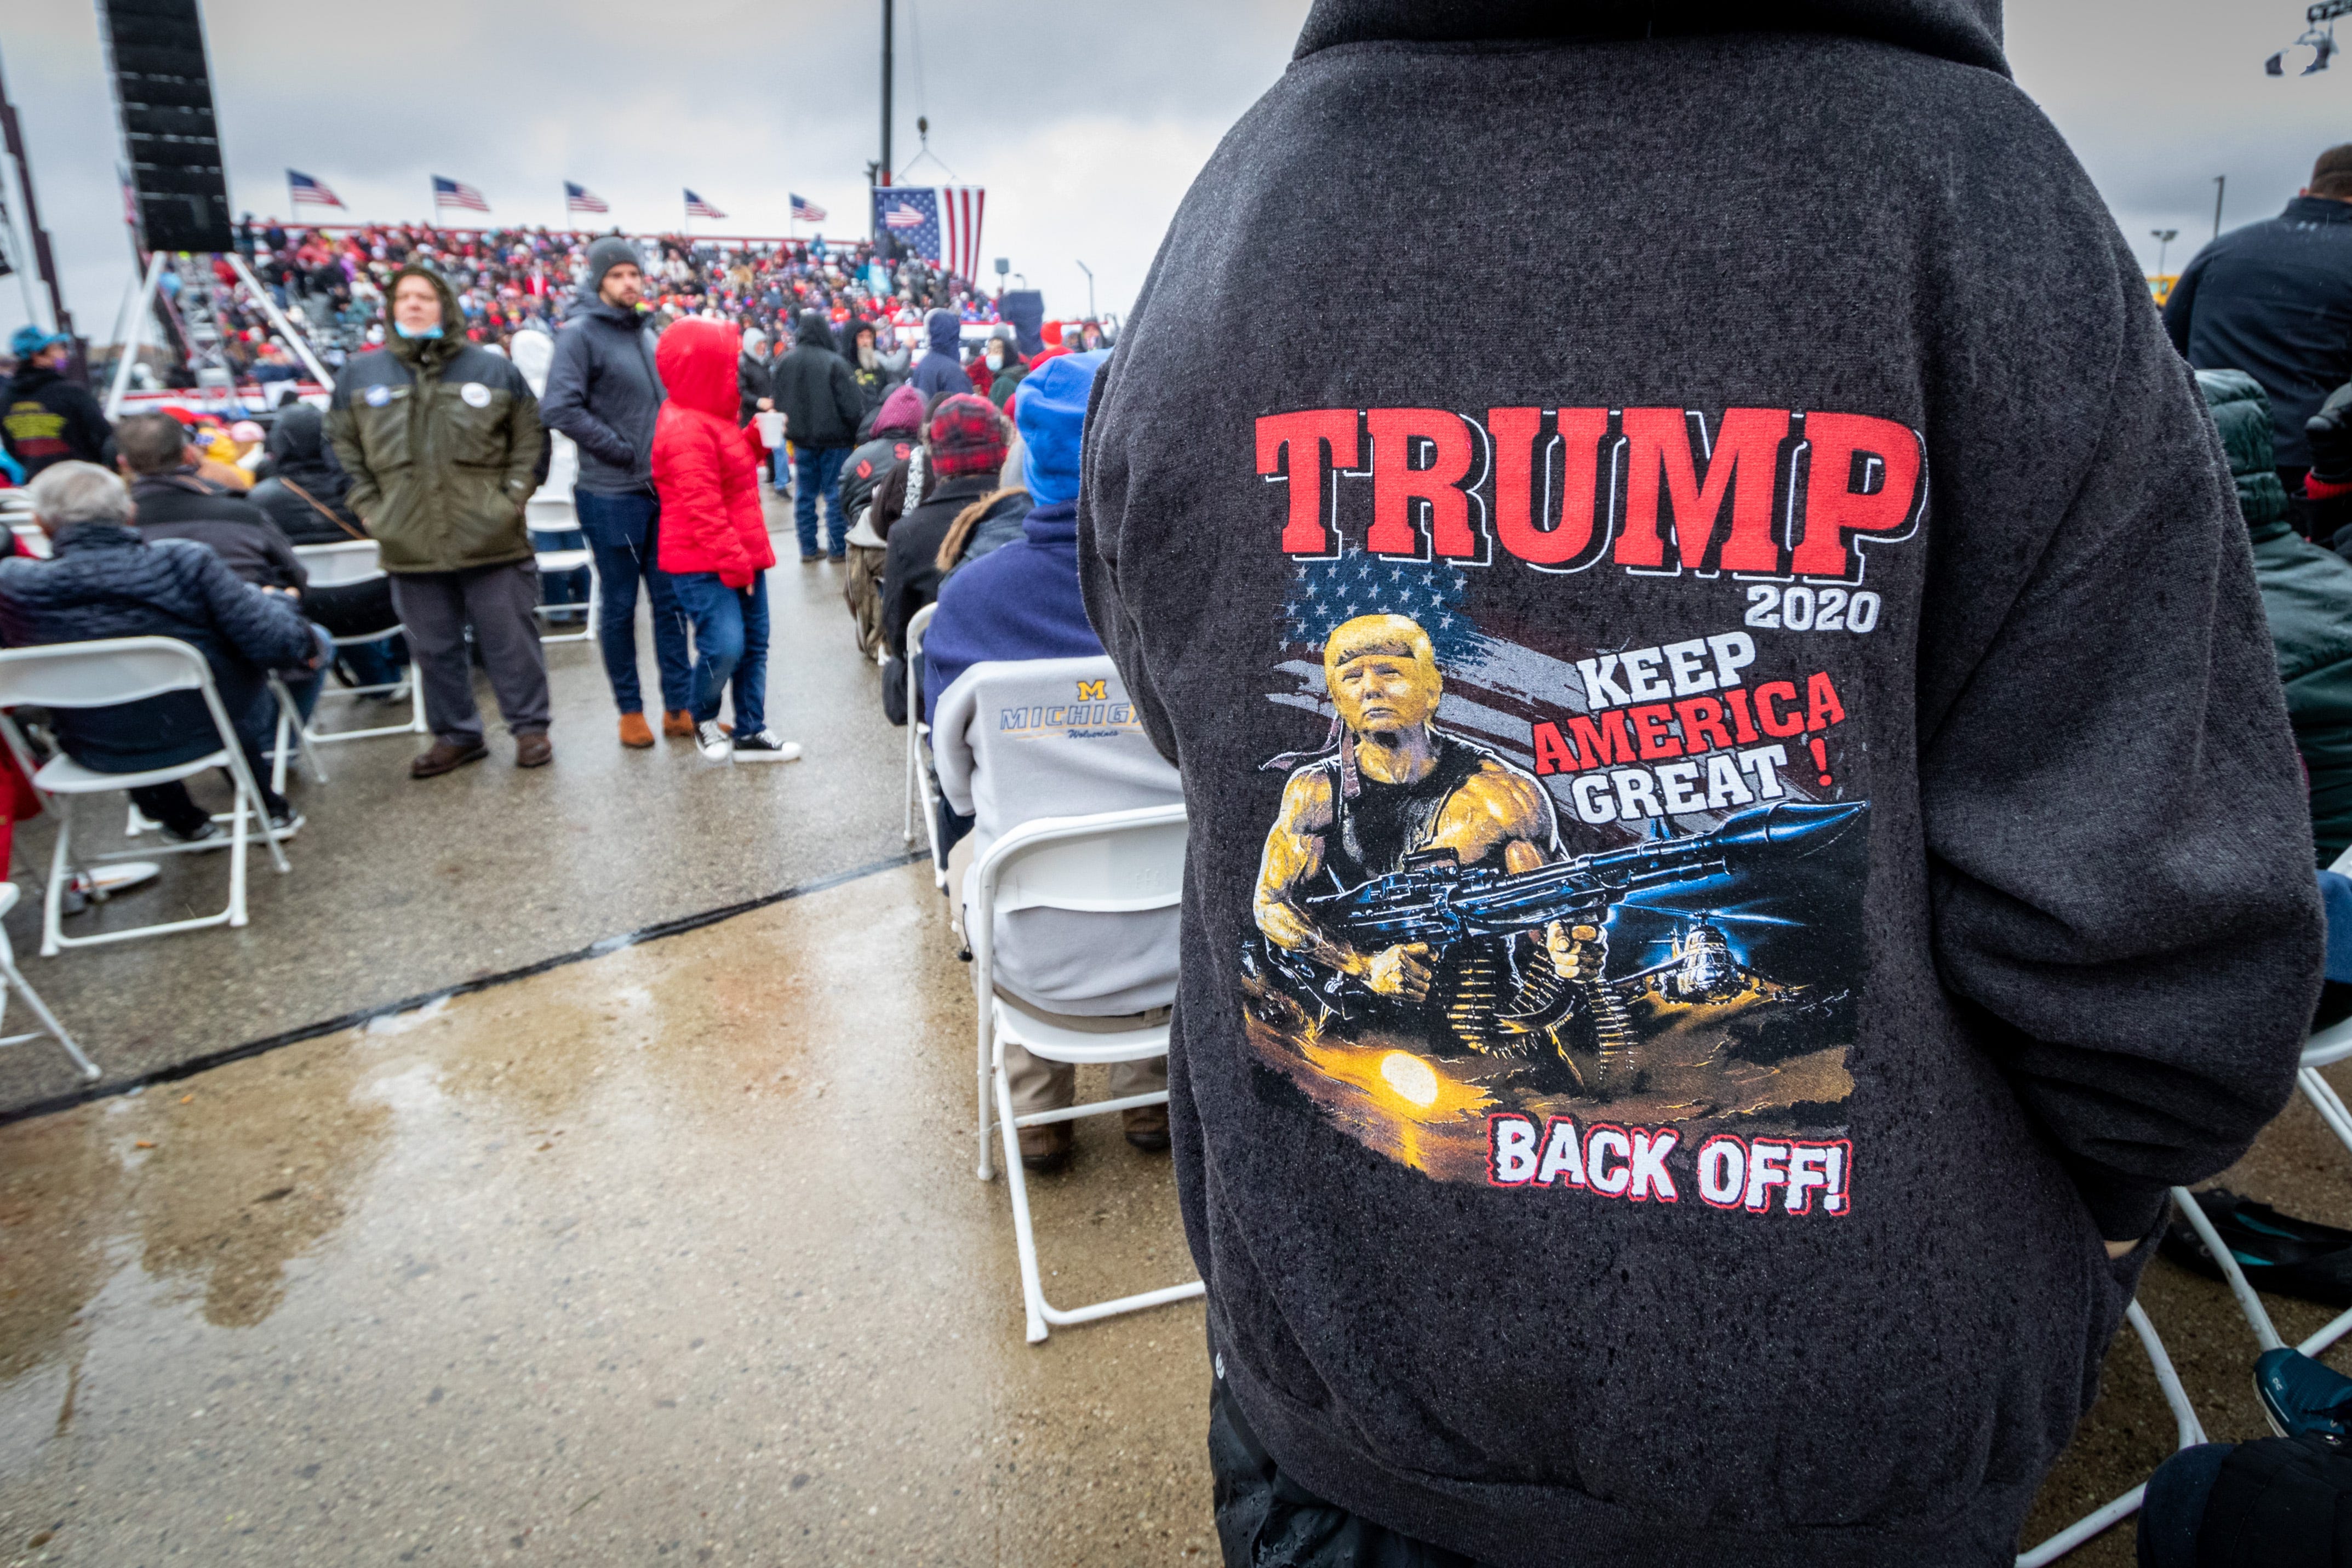 Trump supporters wait in the rain for the Lansing rally to start.